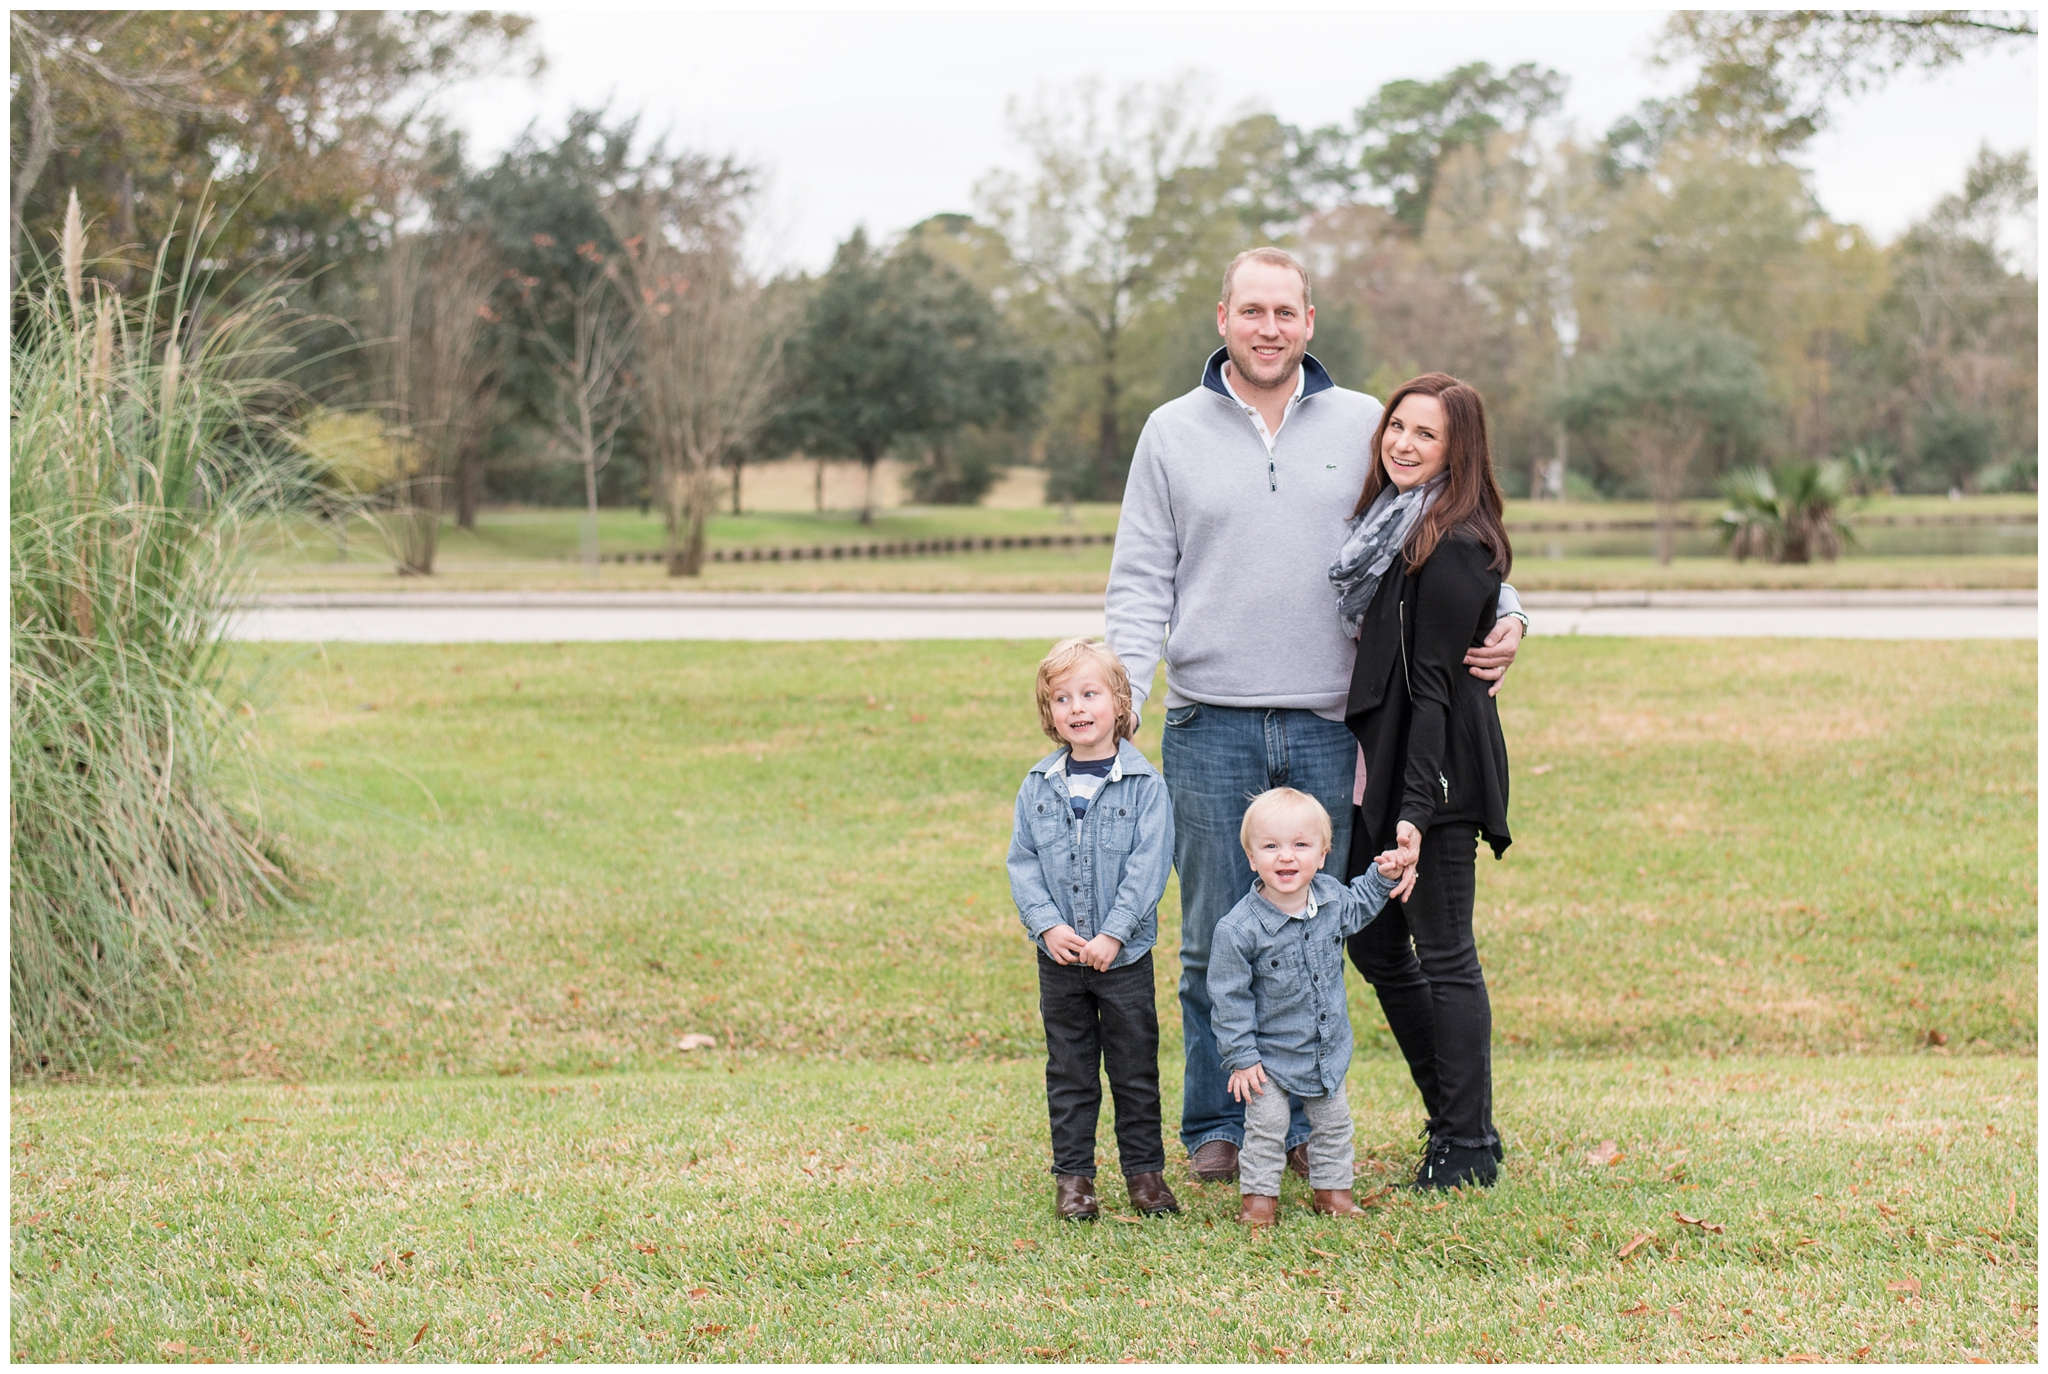 Kingwood family photographer early morning fall family portrait session